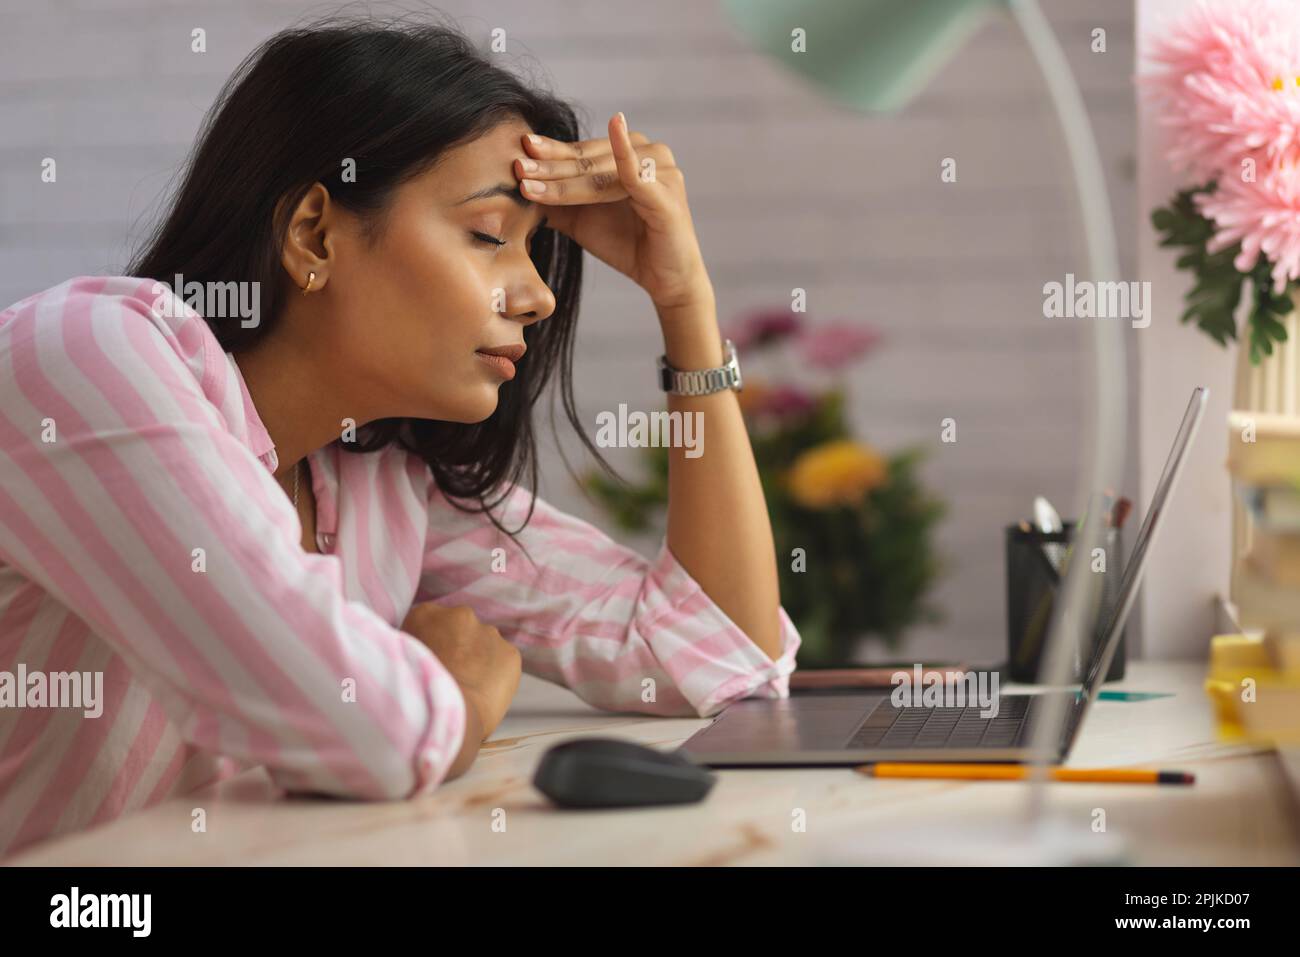 Close-up portrait of a tired woman sitting on desk with hand on head Stock Photo